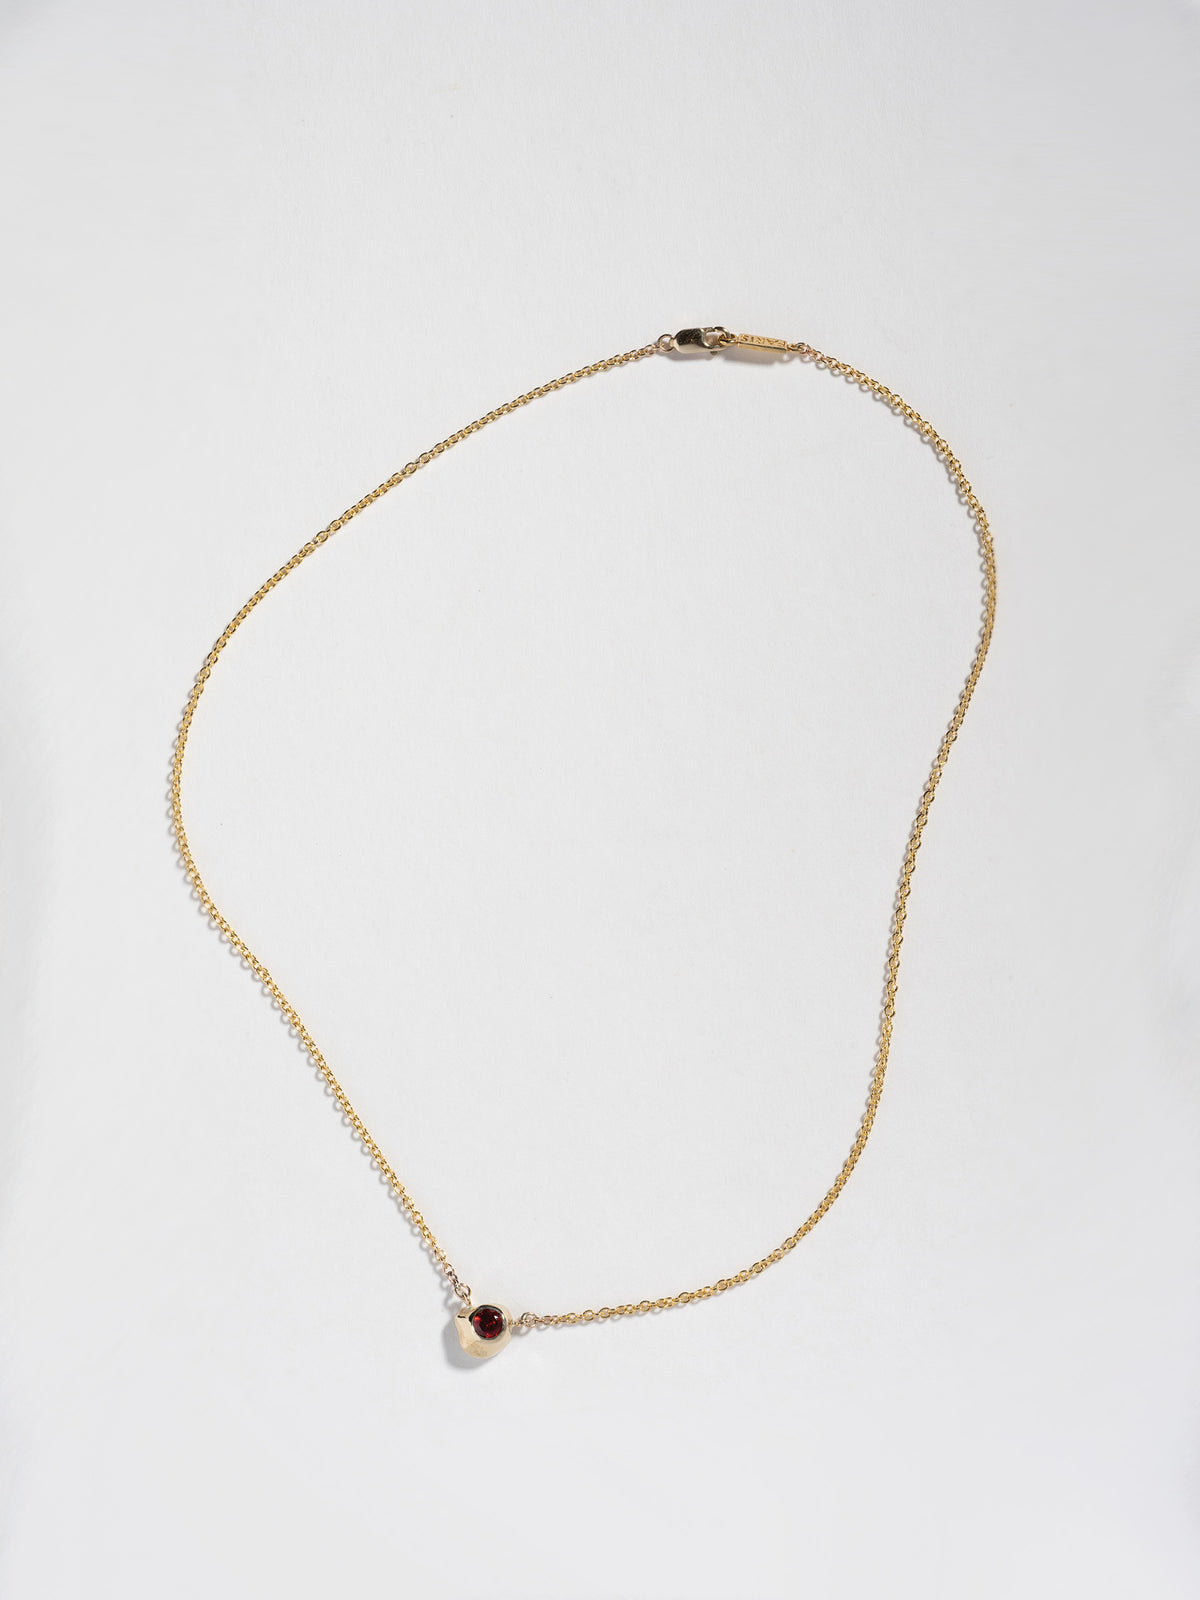 Product image of FARIS KIRA Necklace in 14k gold with garnet, full product shown on white background,  front view